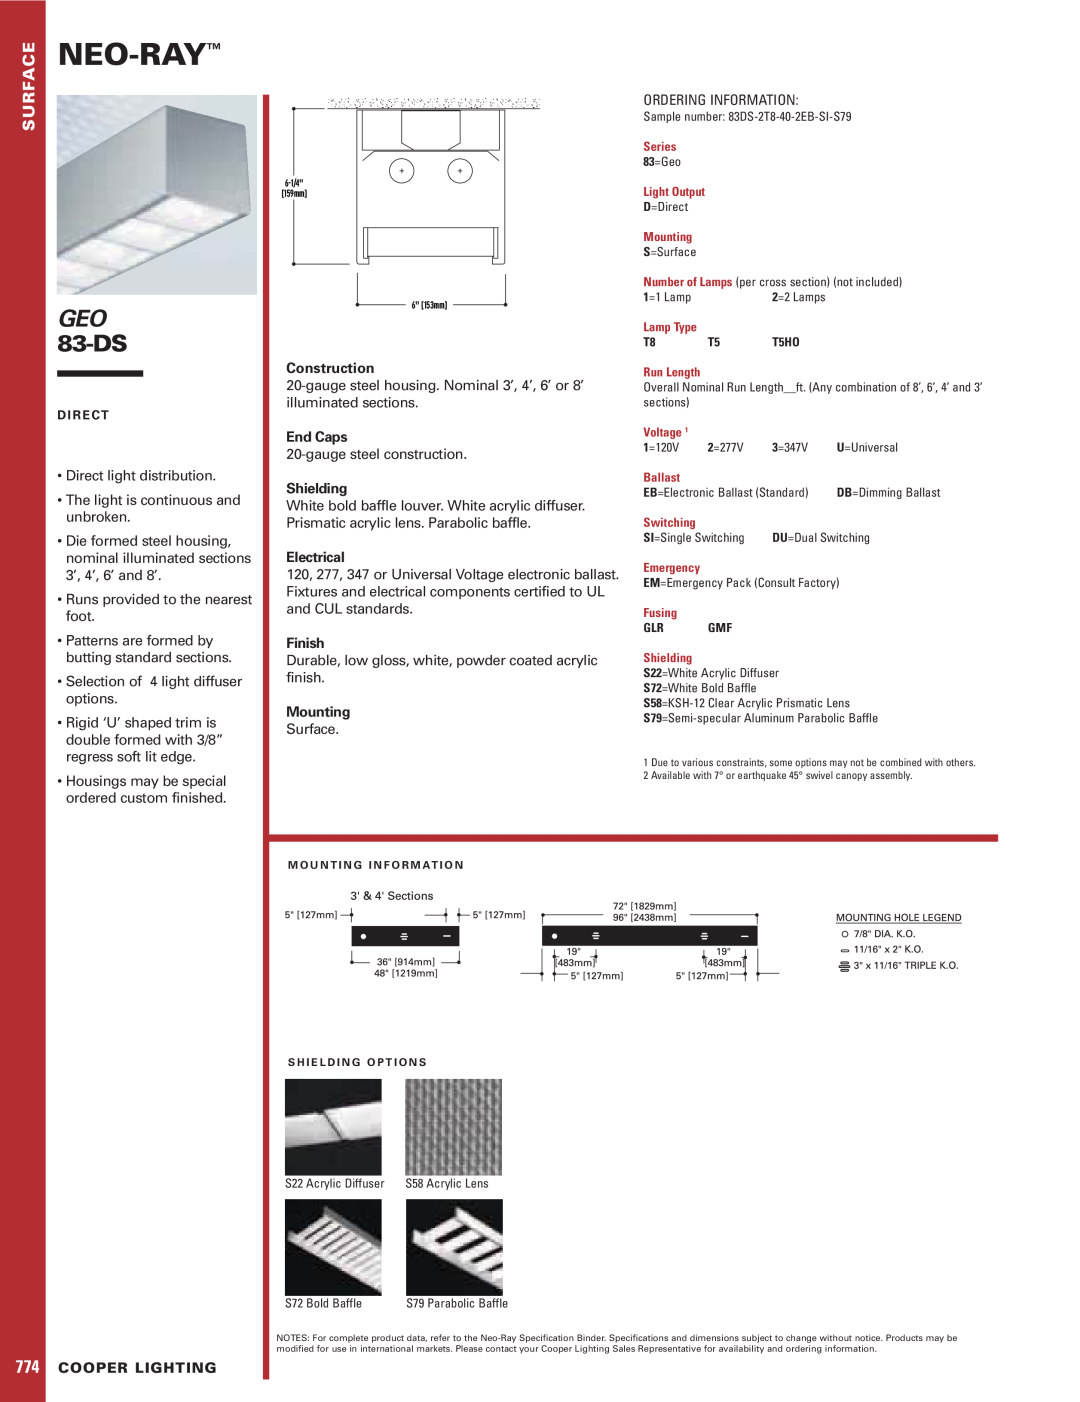 Cooper Lighting GEO 83-DS specifications Neo-Ray, Construction, End Caps, Shielding, Electrical, Finish, Mounting 